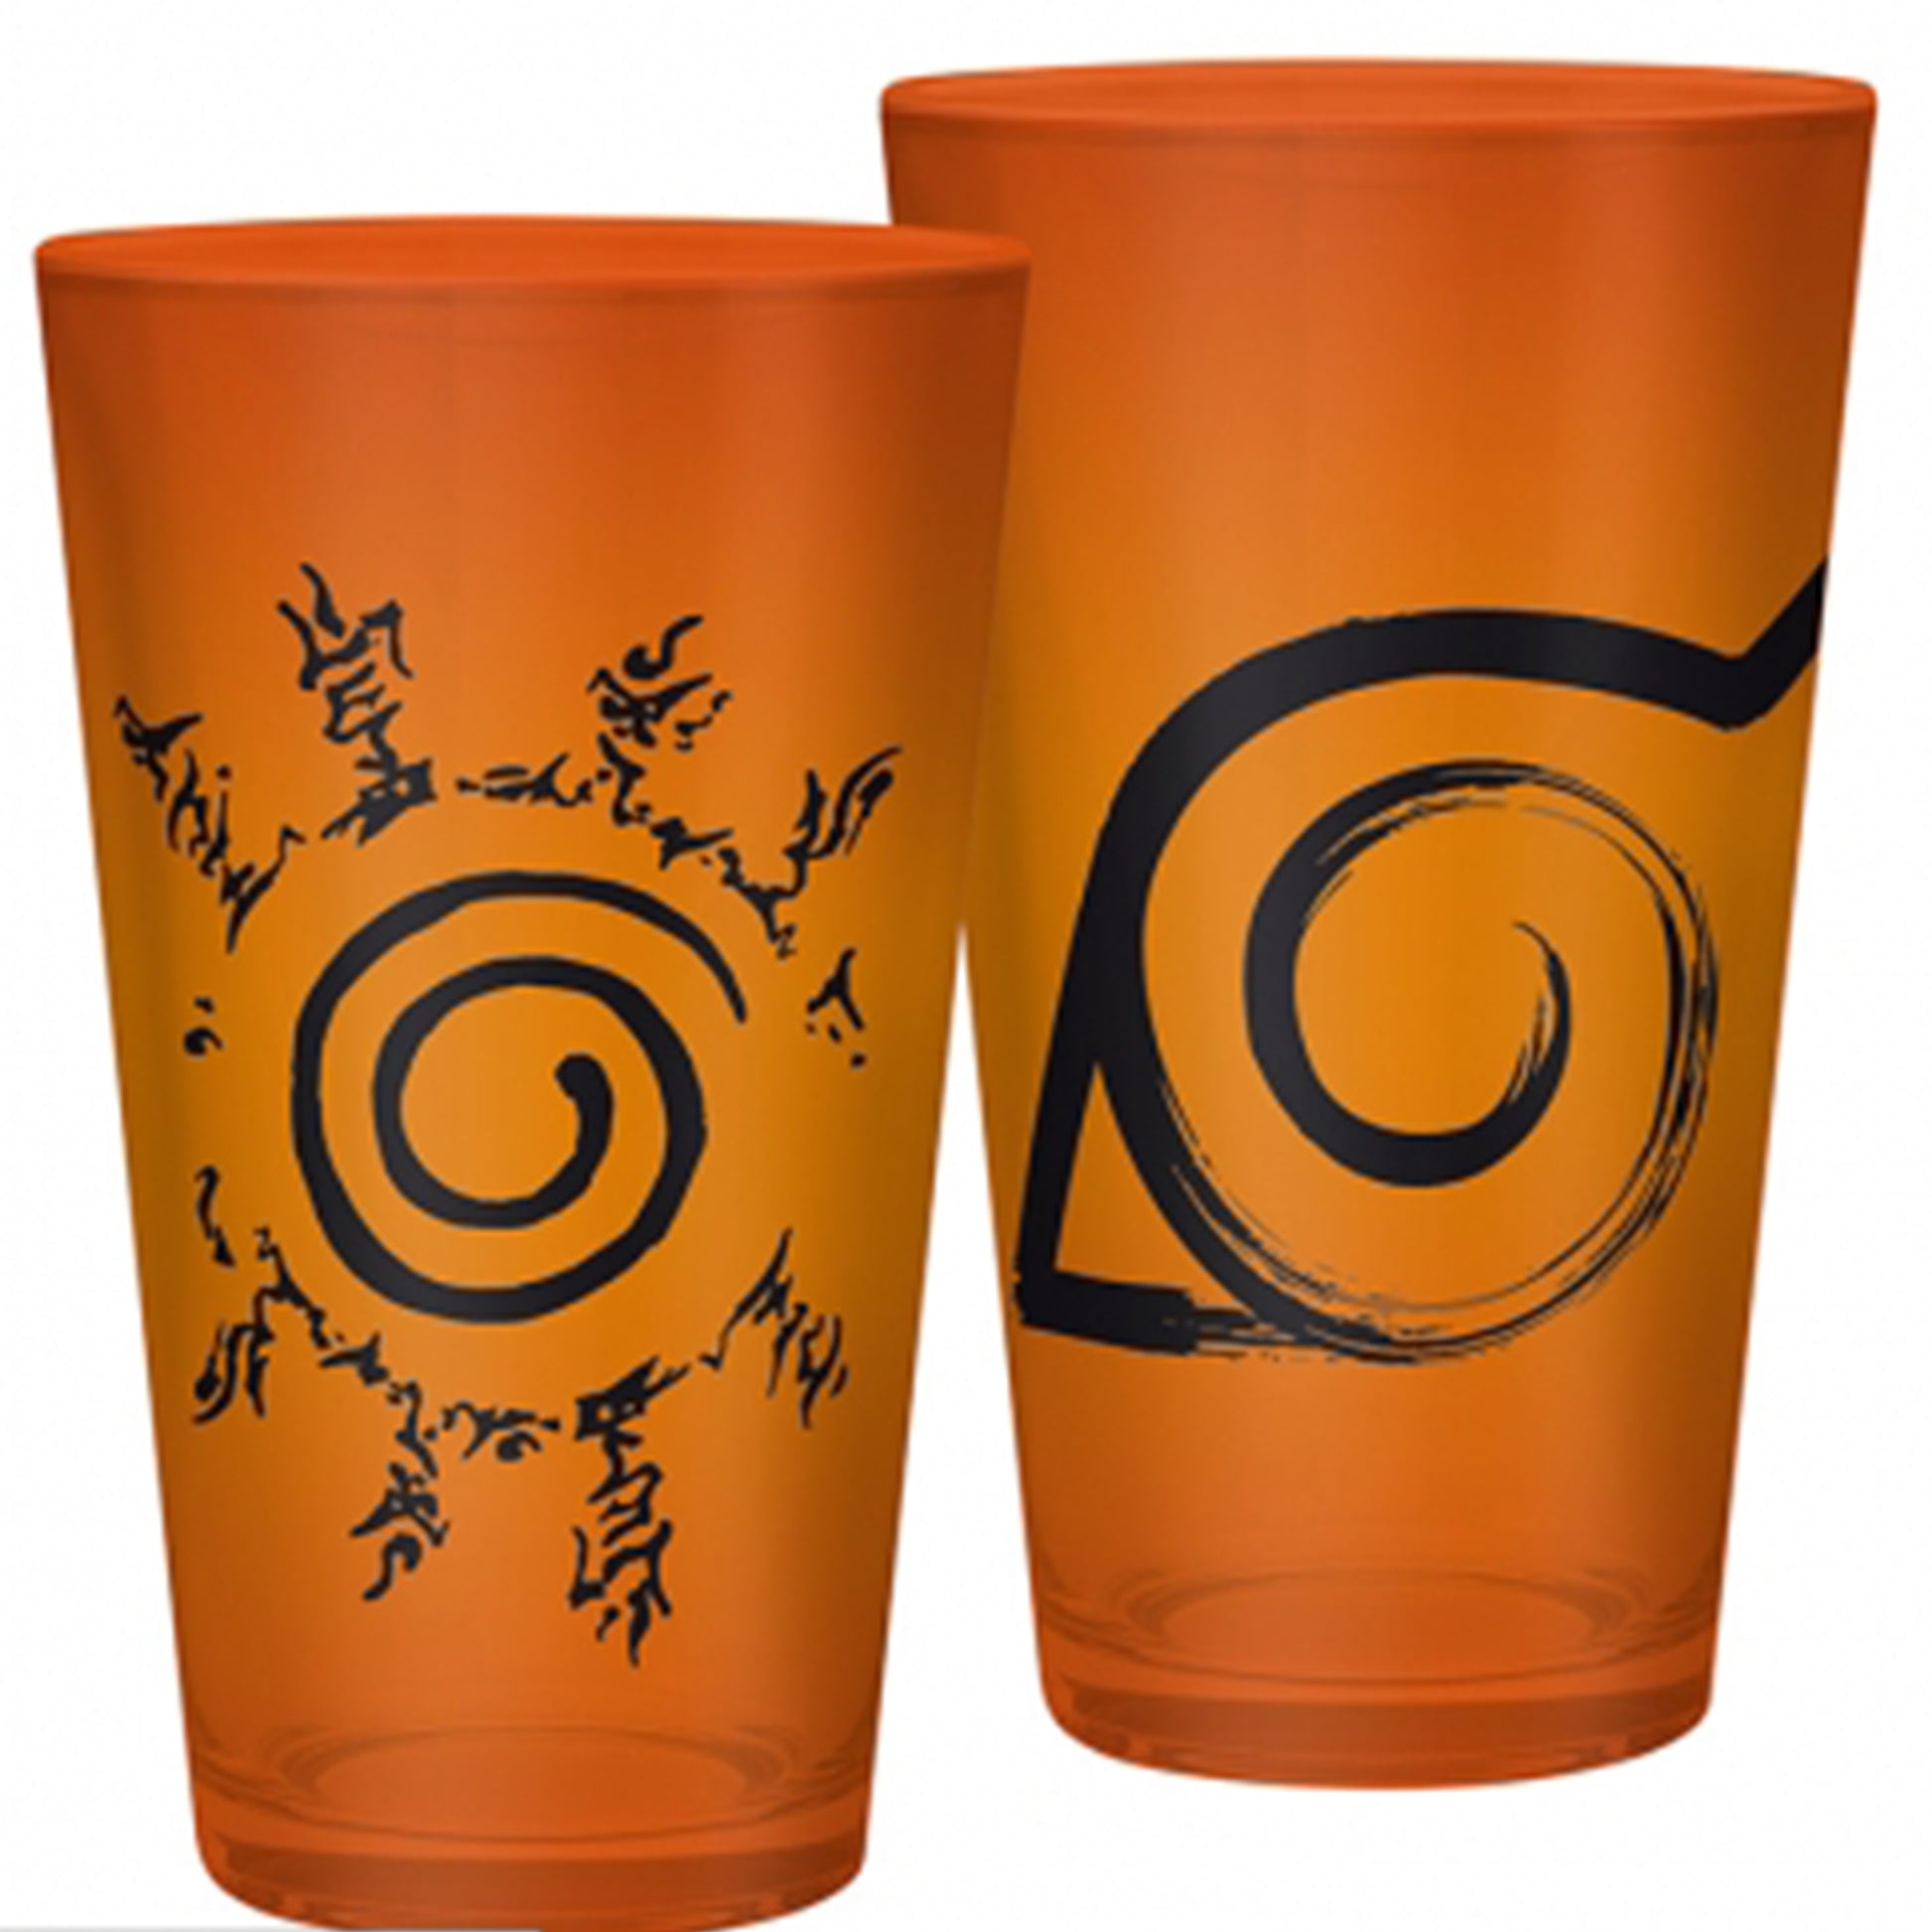 Large Naruto Shippuden Konoha & Seal Glass Back and Front Designs Side by Side | Happy Piranha